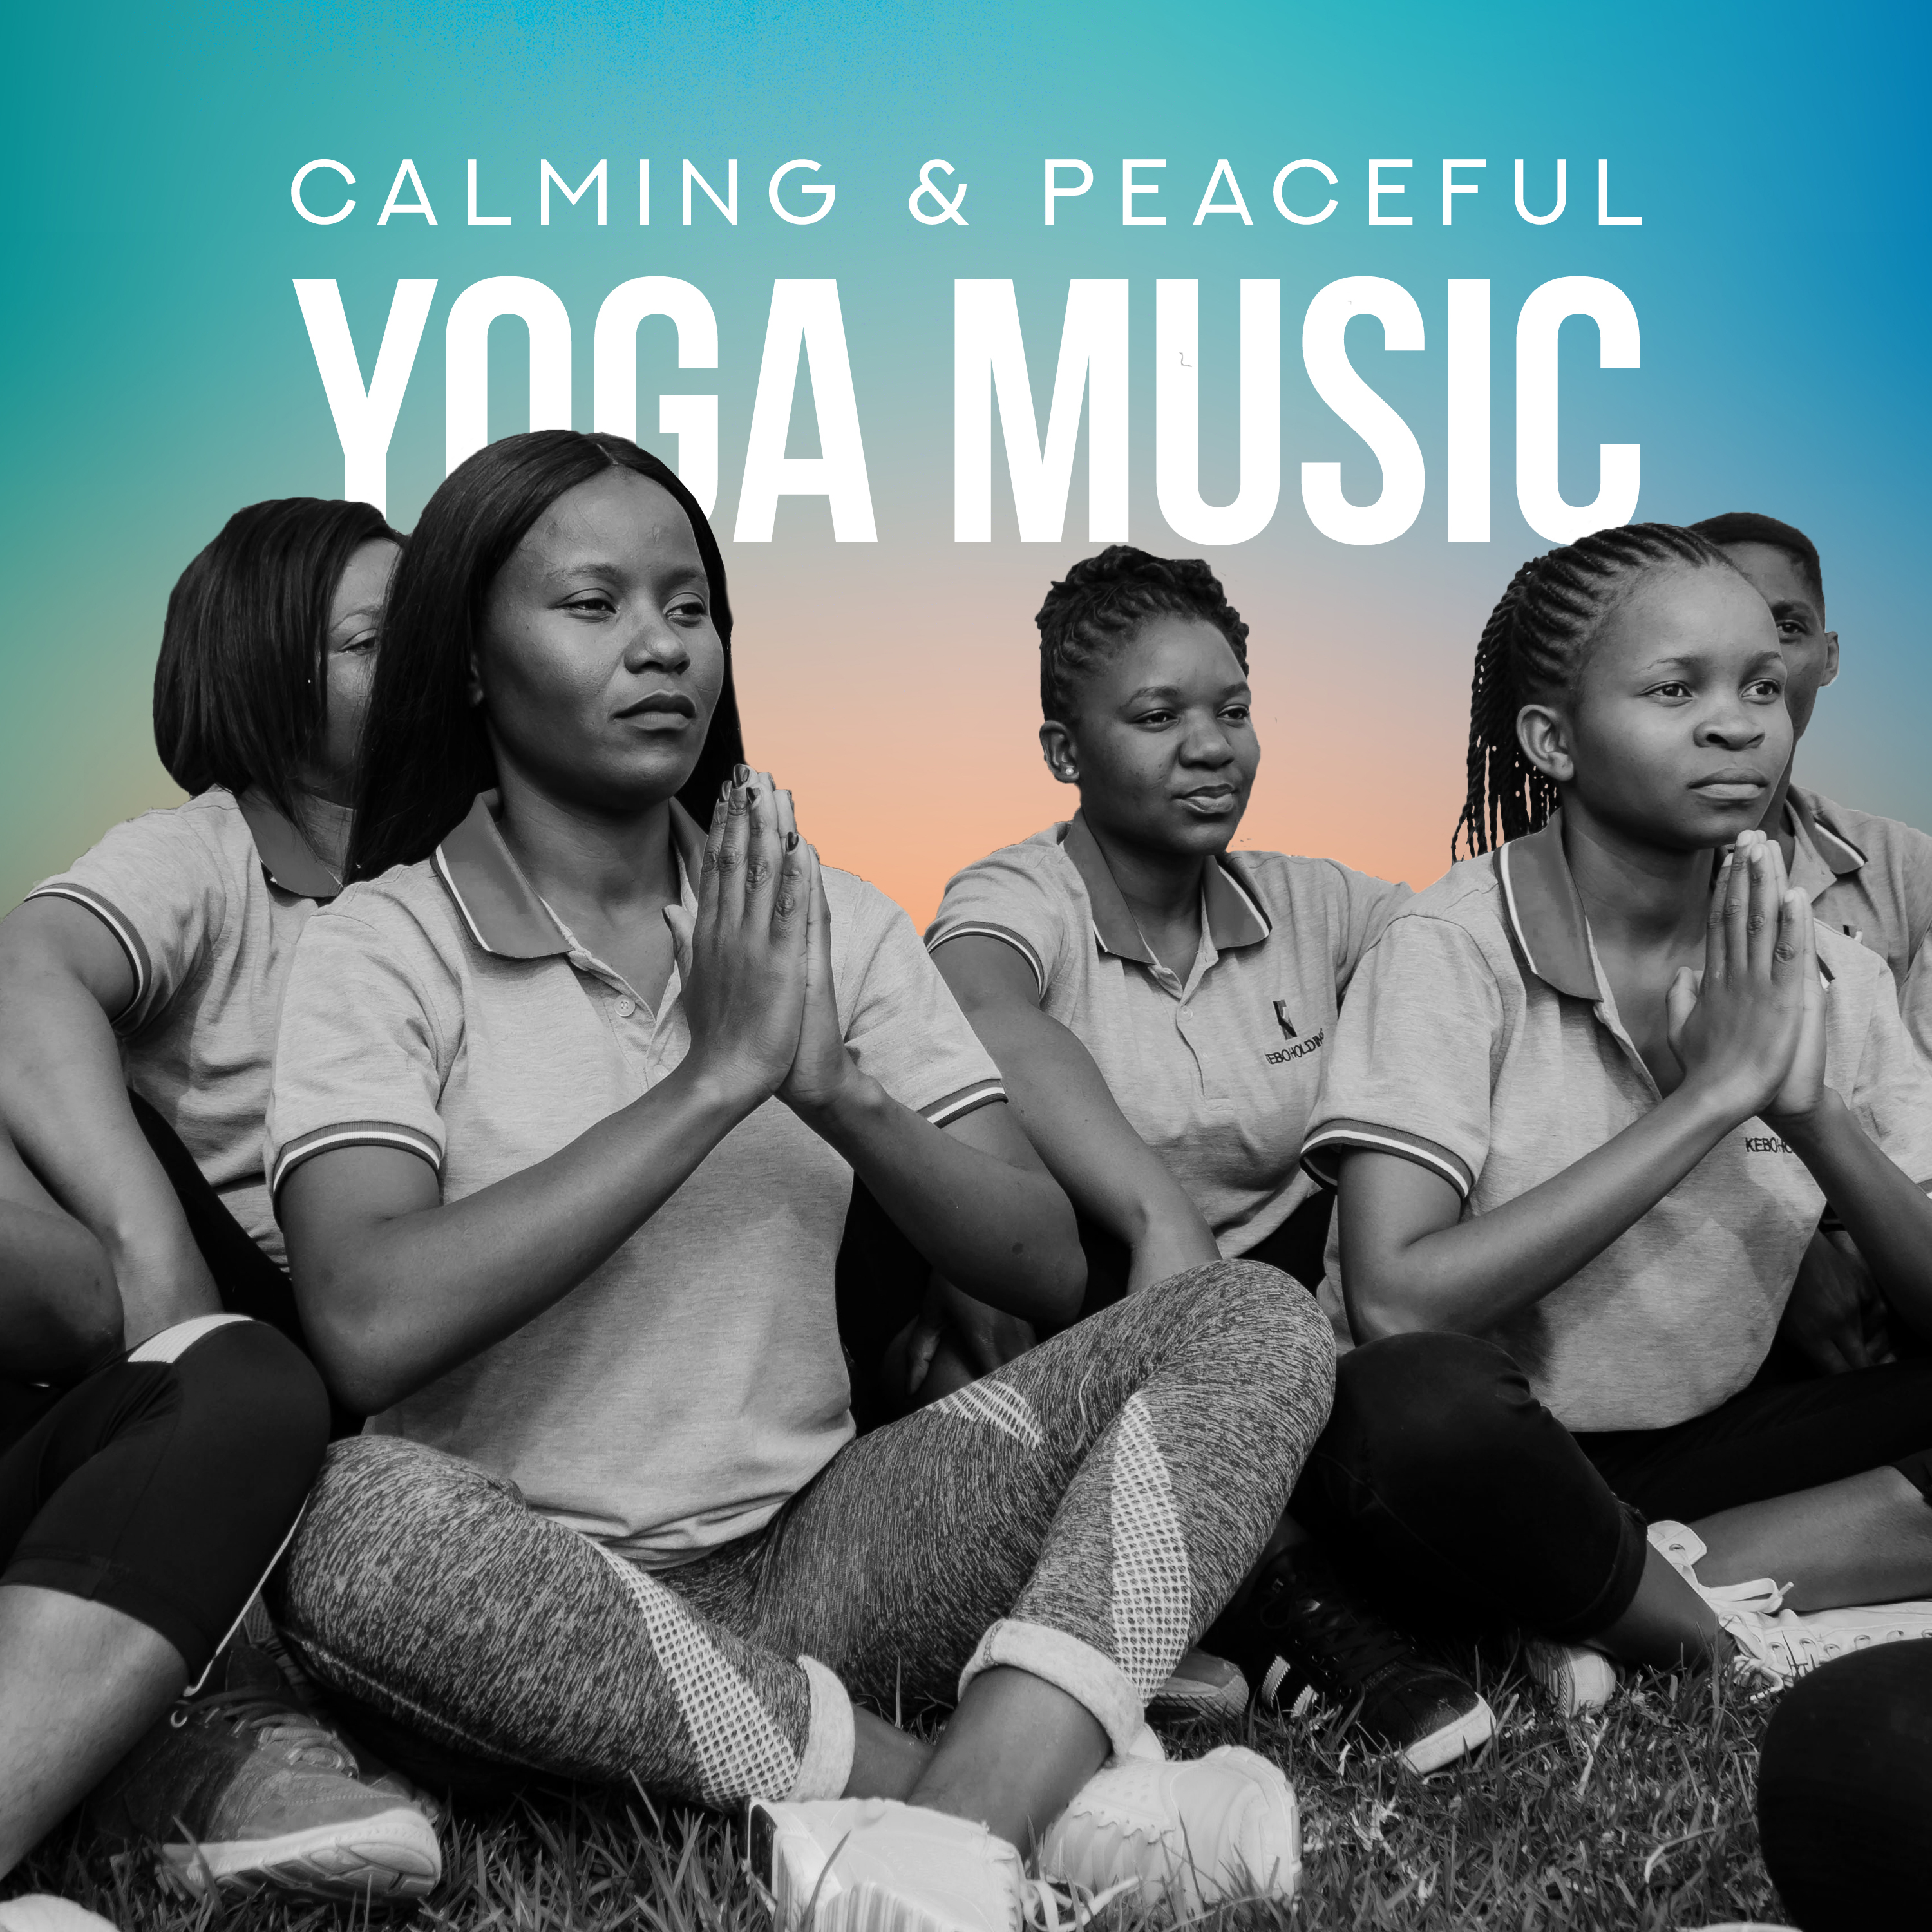 Calming & Peaceful Yoga Music – New Age Mindfulness Meditation Sounds, Relaxation Time